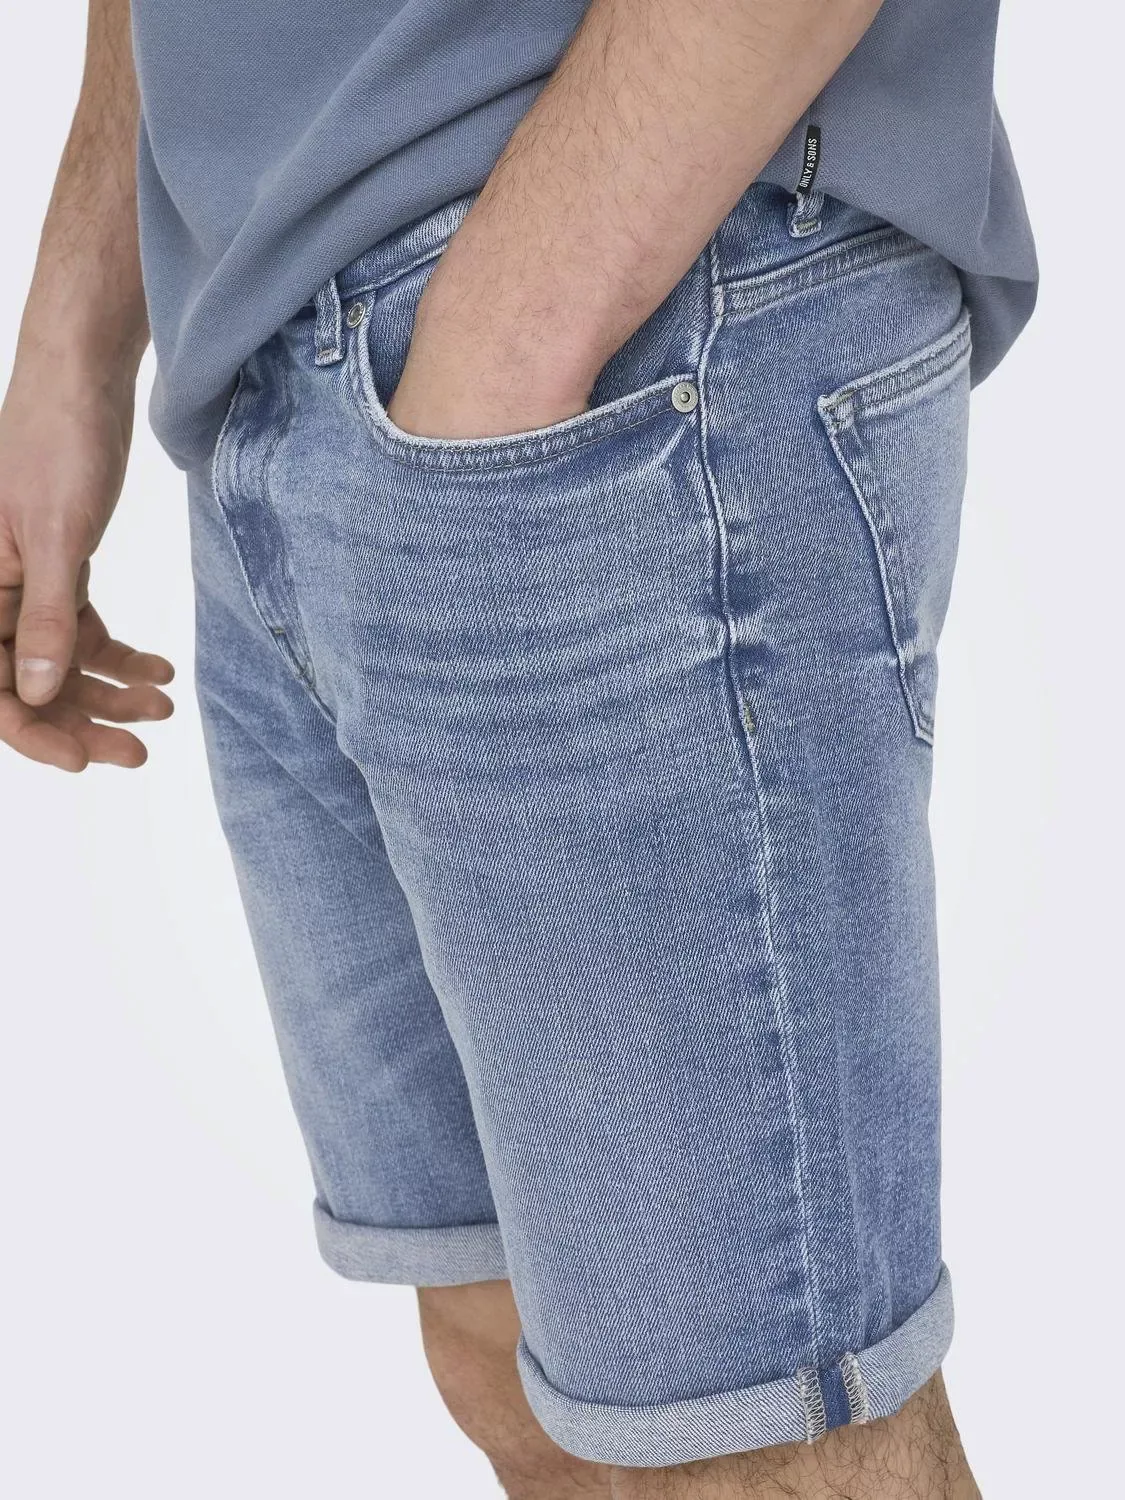 ONLY & SONS Shorts "ONSPLY MBD 8772 TAI DNM SHORTS NOOS" günstig online kaufen